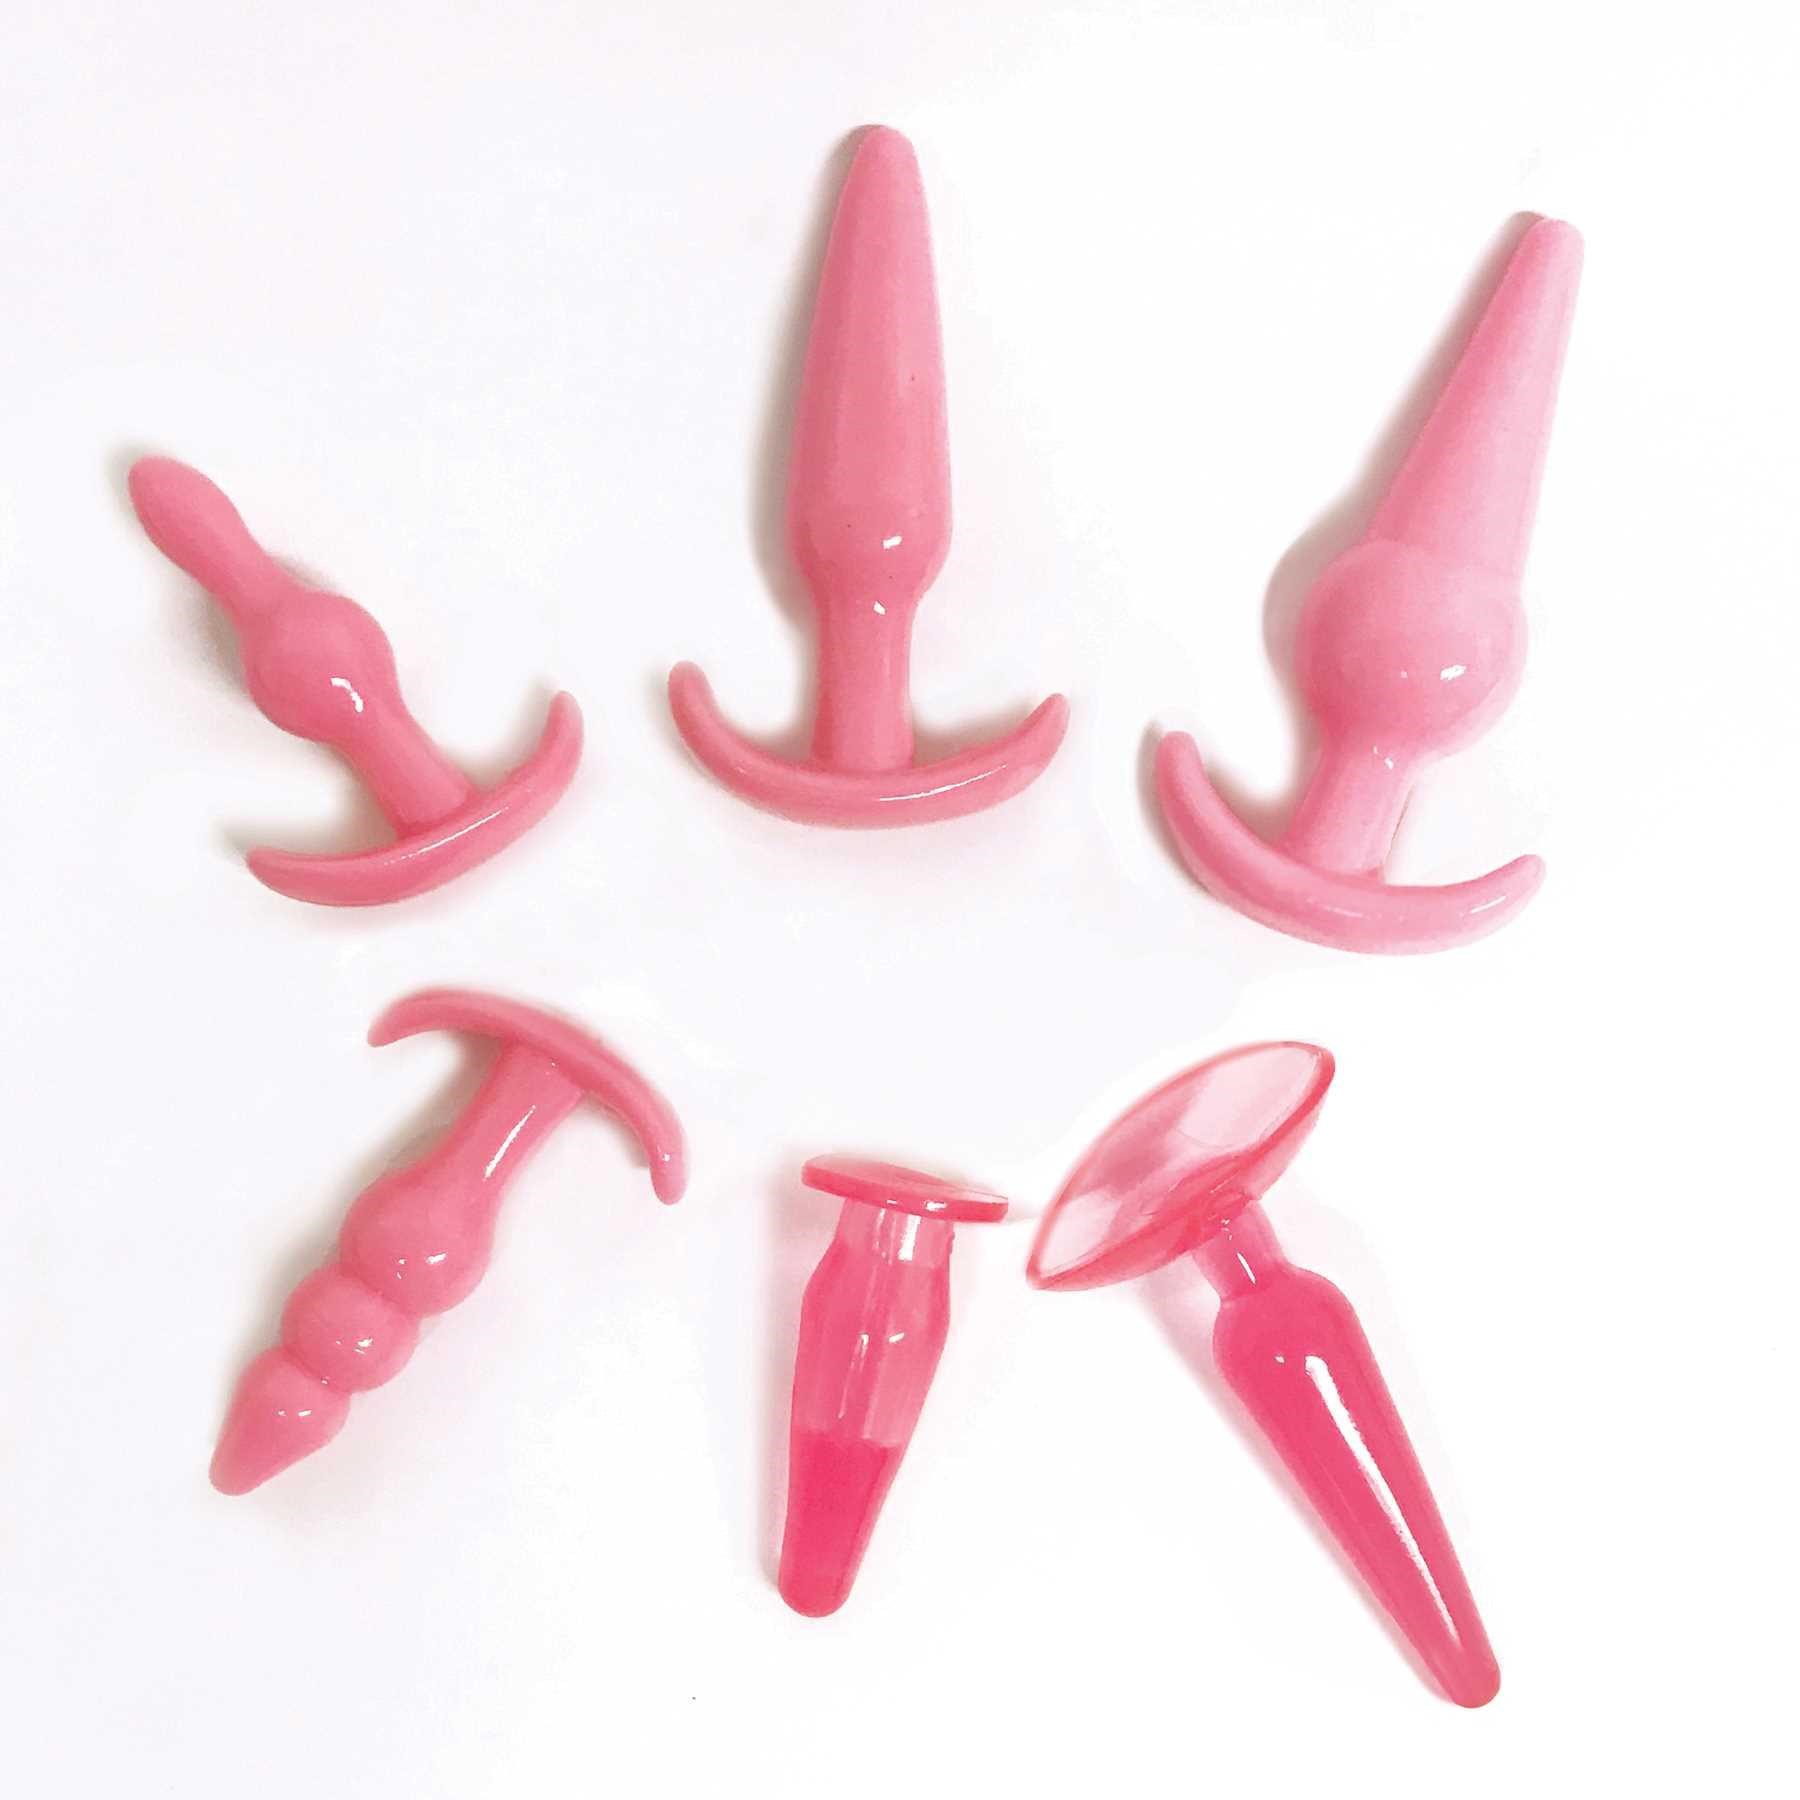 Try-Curious Anal Plug Kit - pink